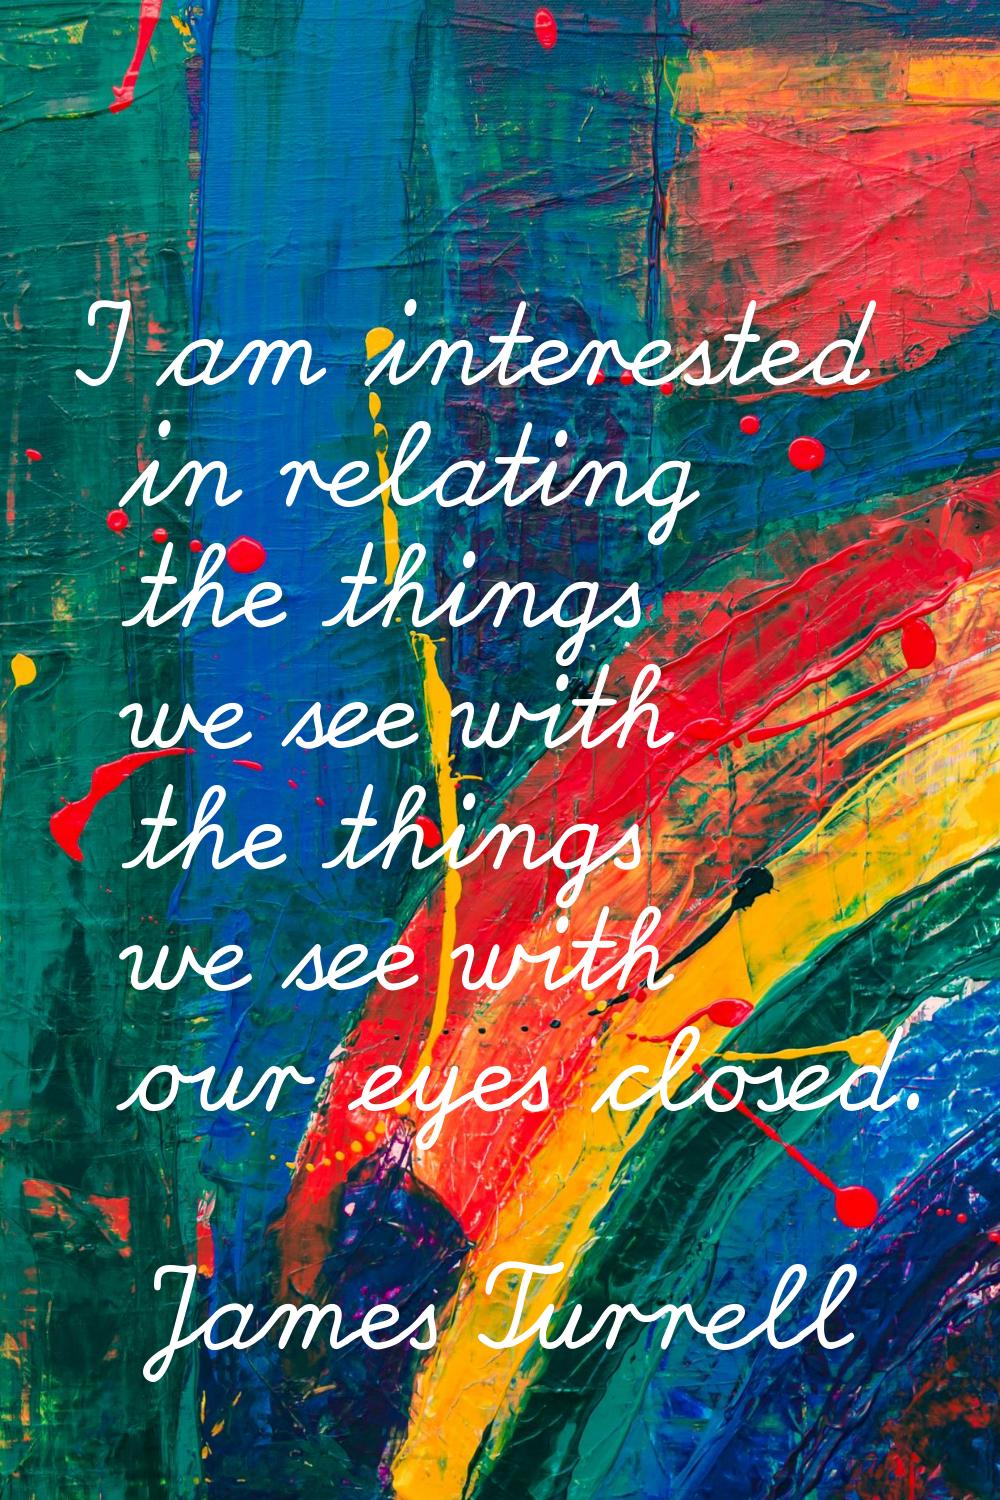 I am interested in relating the things we see with the things we see with our eyes closed.